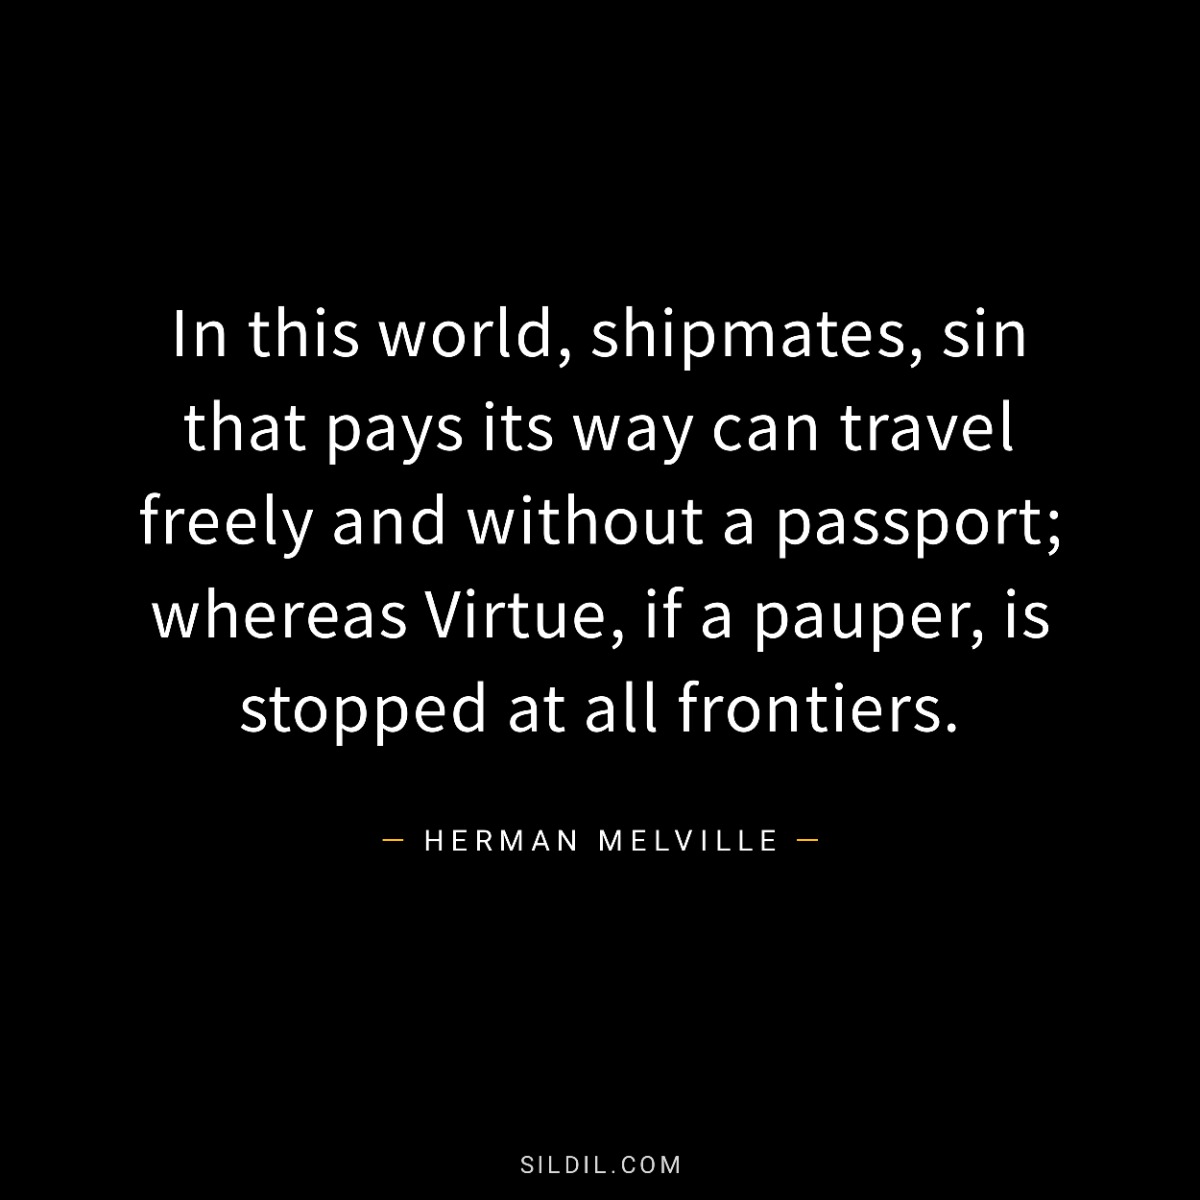 In this world, shipmates, sin that pays its way can travel freely and without a passport; whereas Virtue, if a pauper, is stopped at all frontiers.